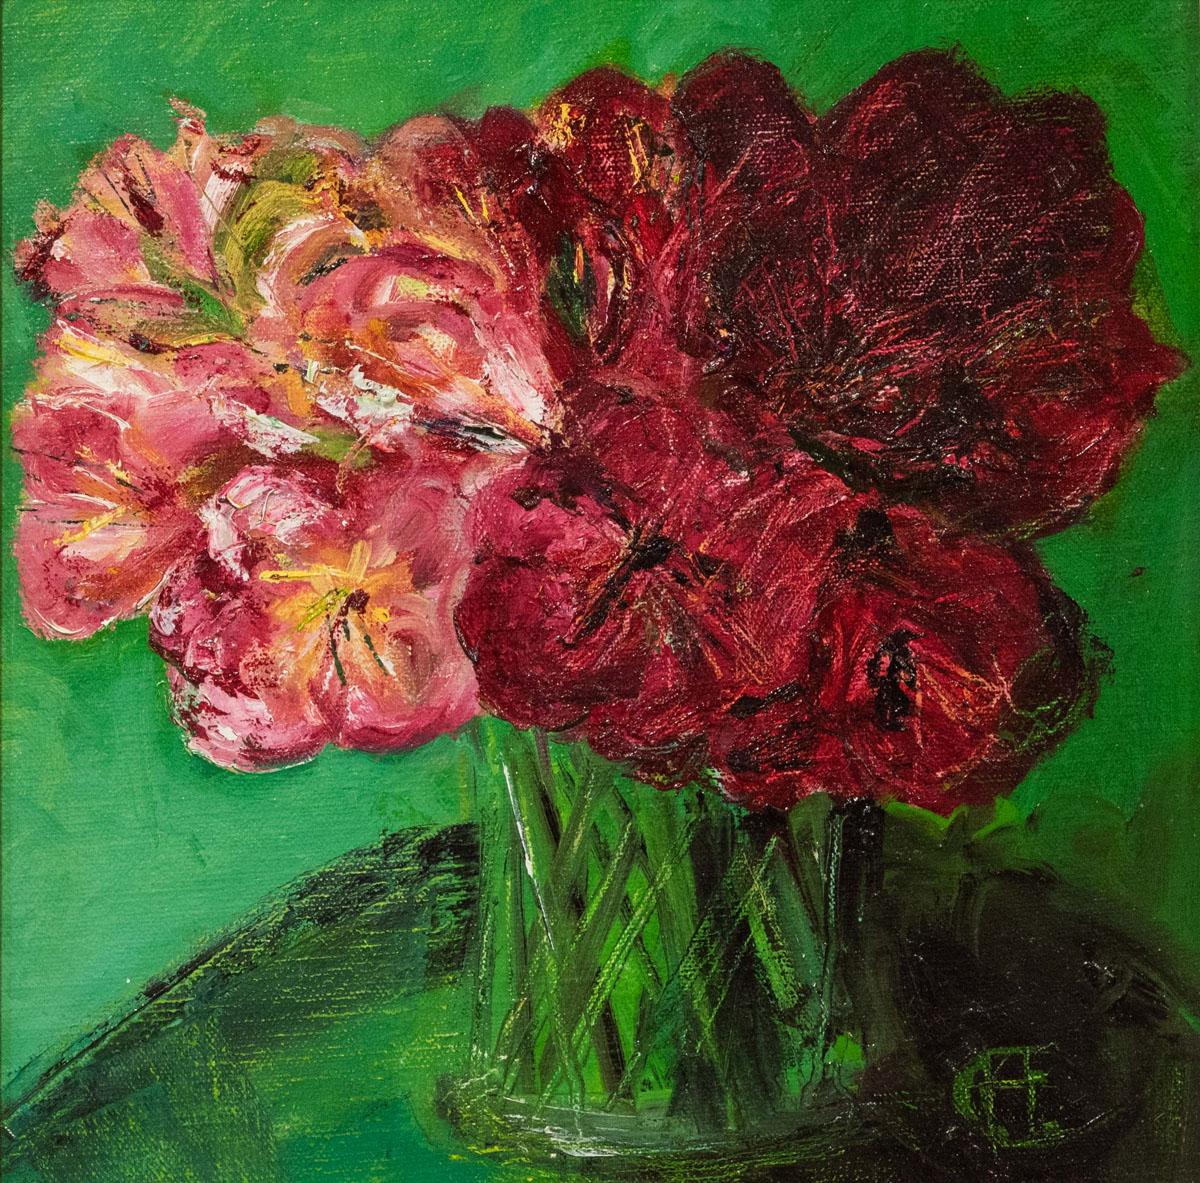 Henrietta Caledon
lAstroemeria Red on Green
Framed Original Oil Painting
Oil on Canvas Board
Canvas Size: H 29cm x W 29cm
Framed Size: H 43cm x W 43cm
Signed by the artist
Please note that the images of this piece in situ are only an